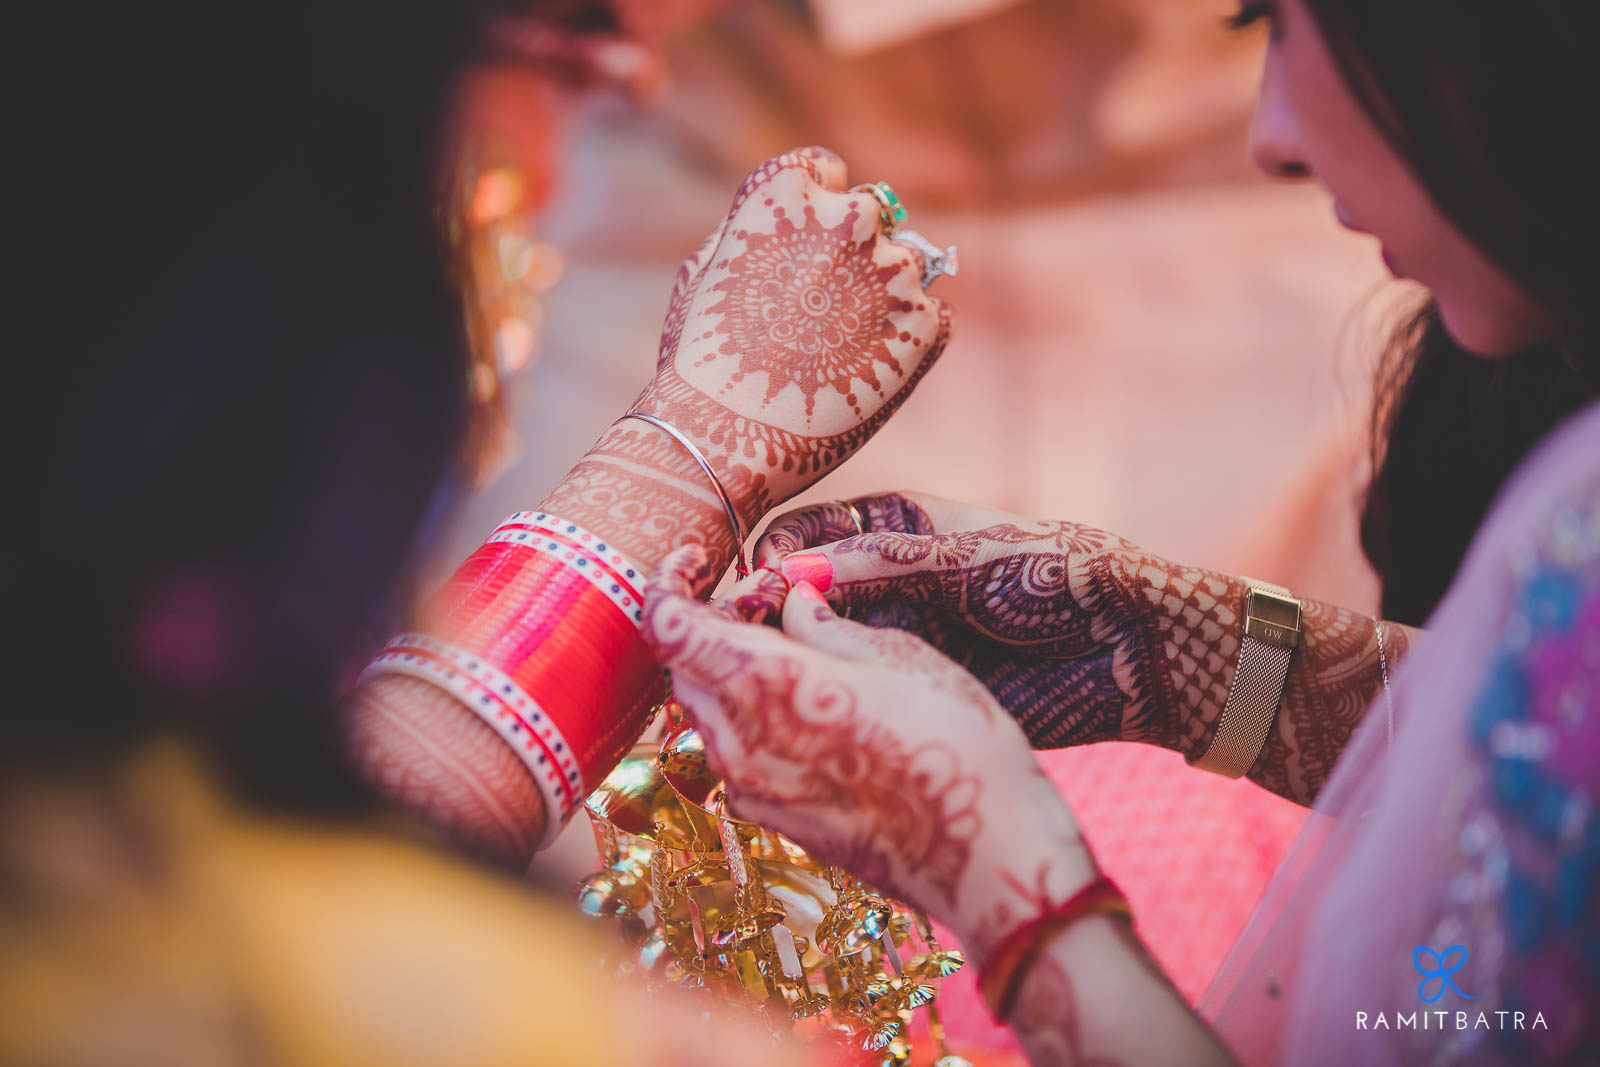 Kaleerey at the Chooda Ceremony - Indian wedding traditions and customs